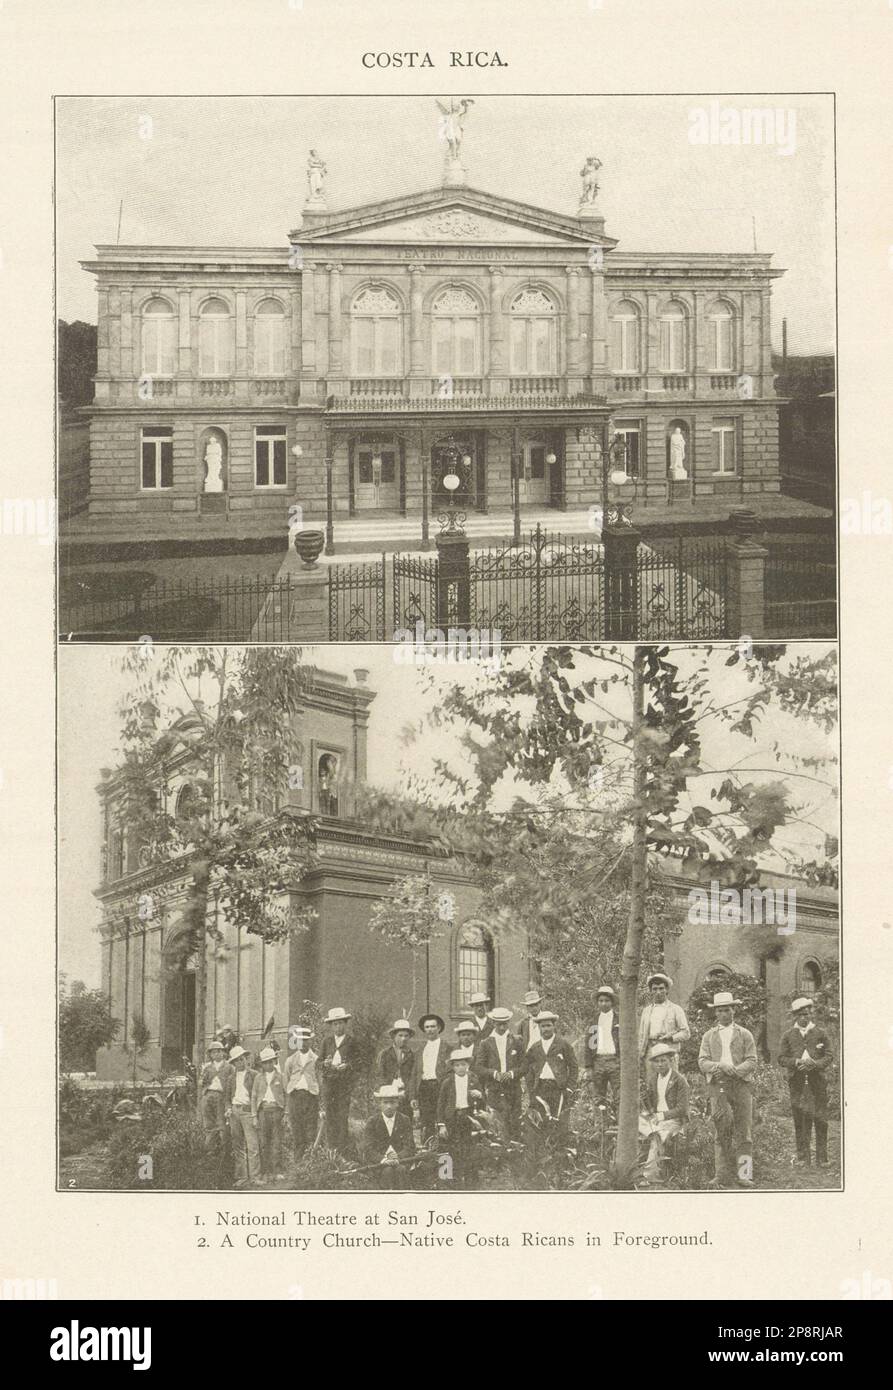 COSTA RICA. National Theatre at San Jose. A Country Church 1907 old print Stock Photo